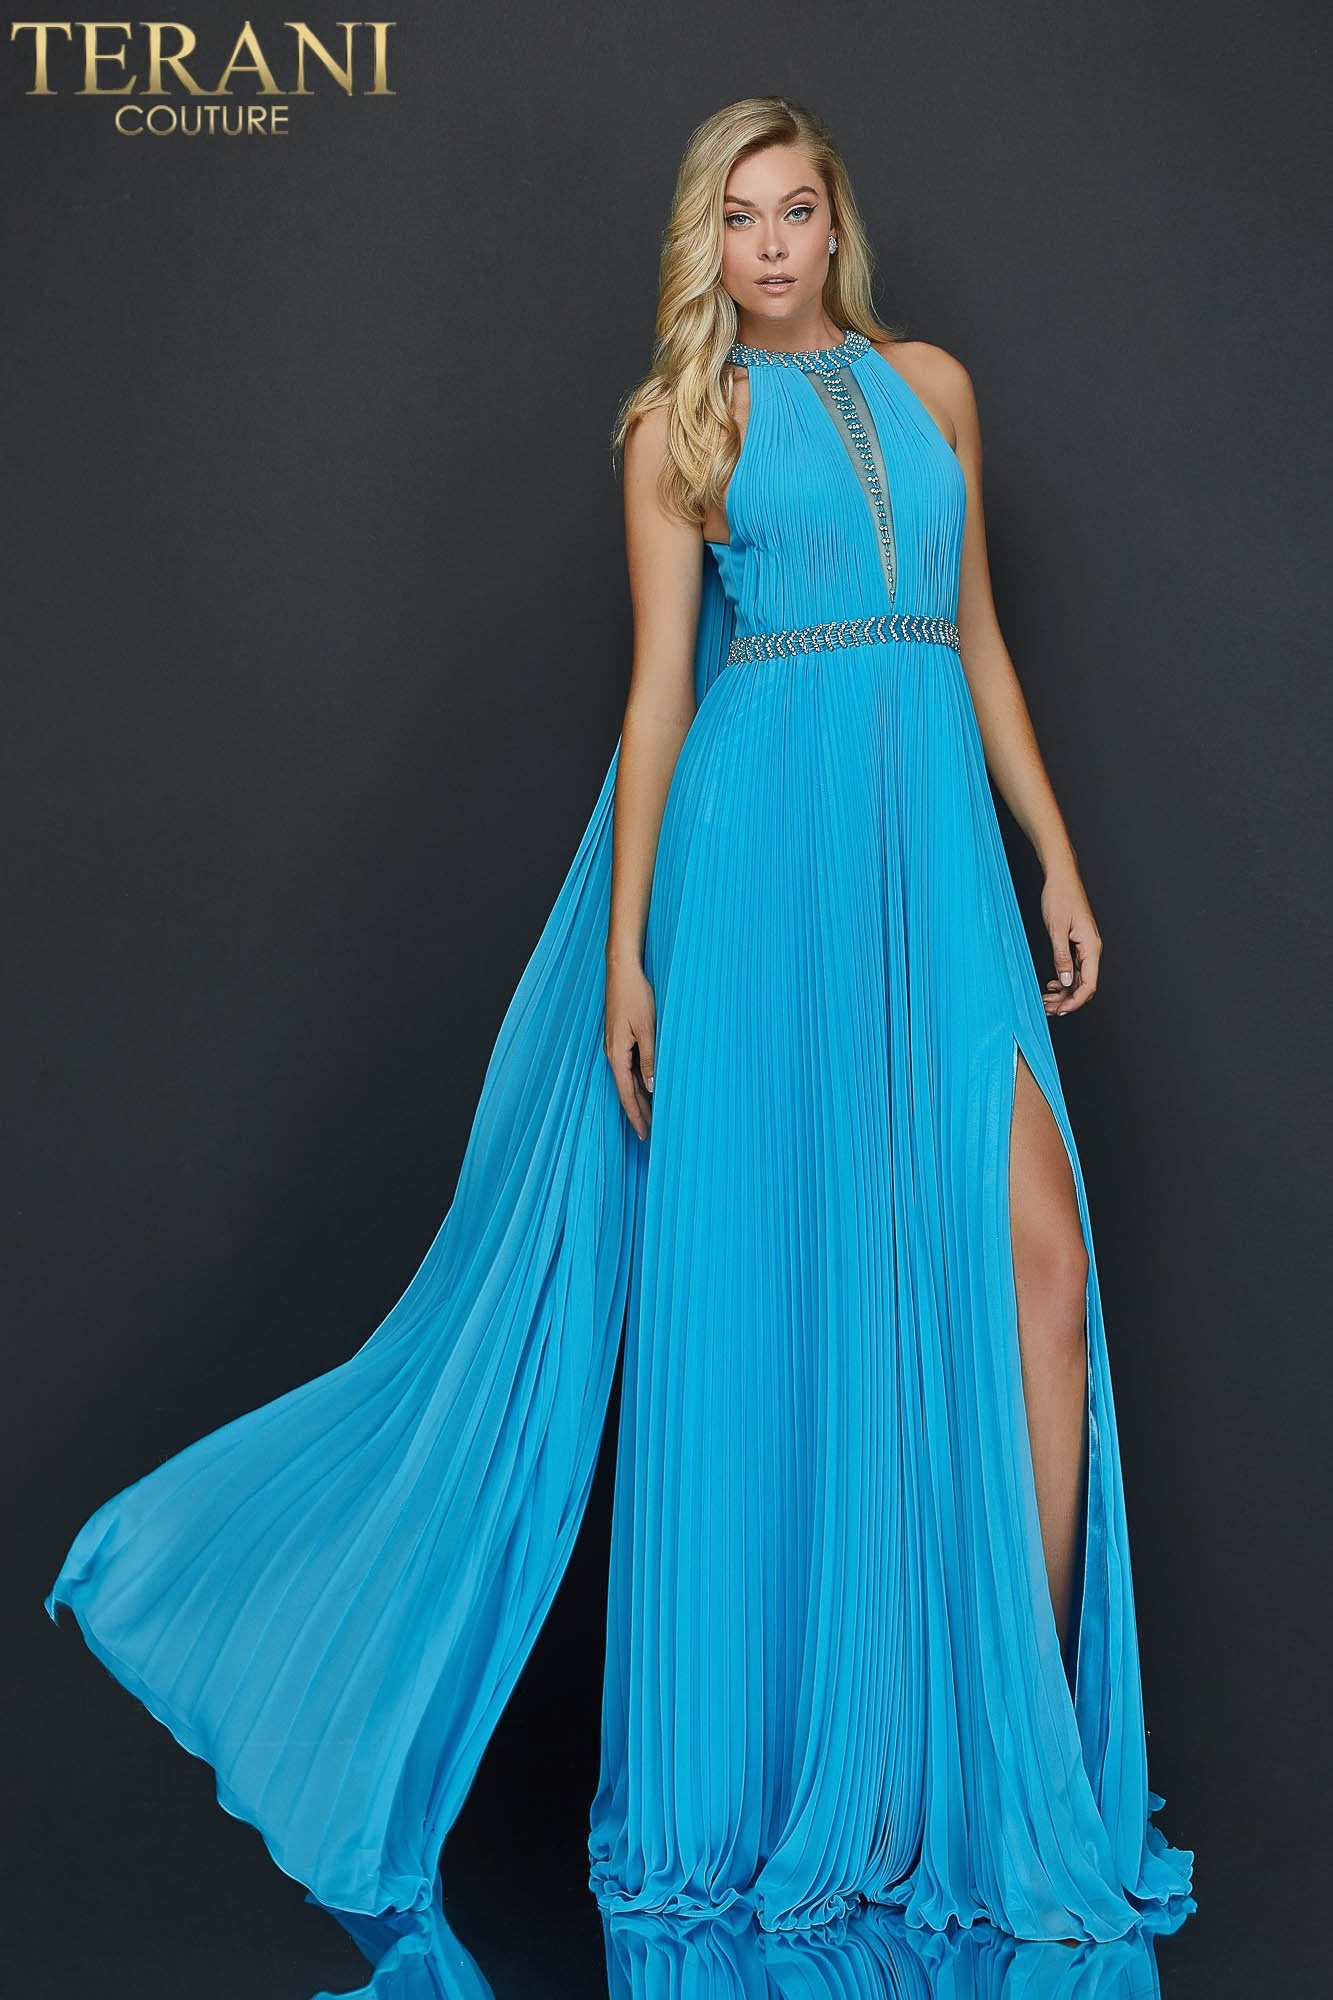 Flowing Chiffon Halter Neck Prom Dress With High Slit - Rofial Beauty